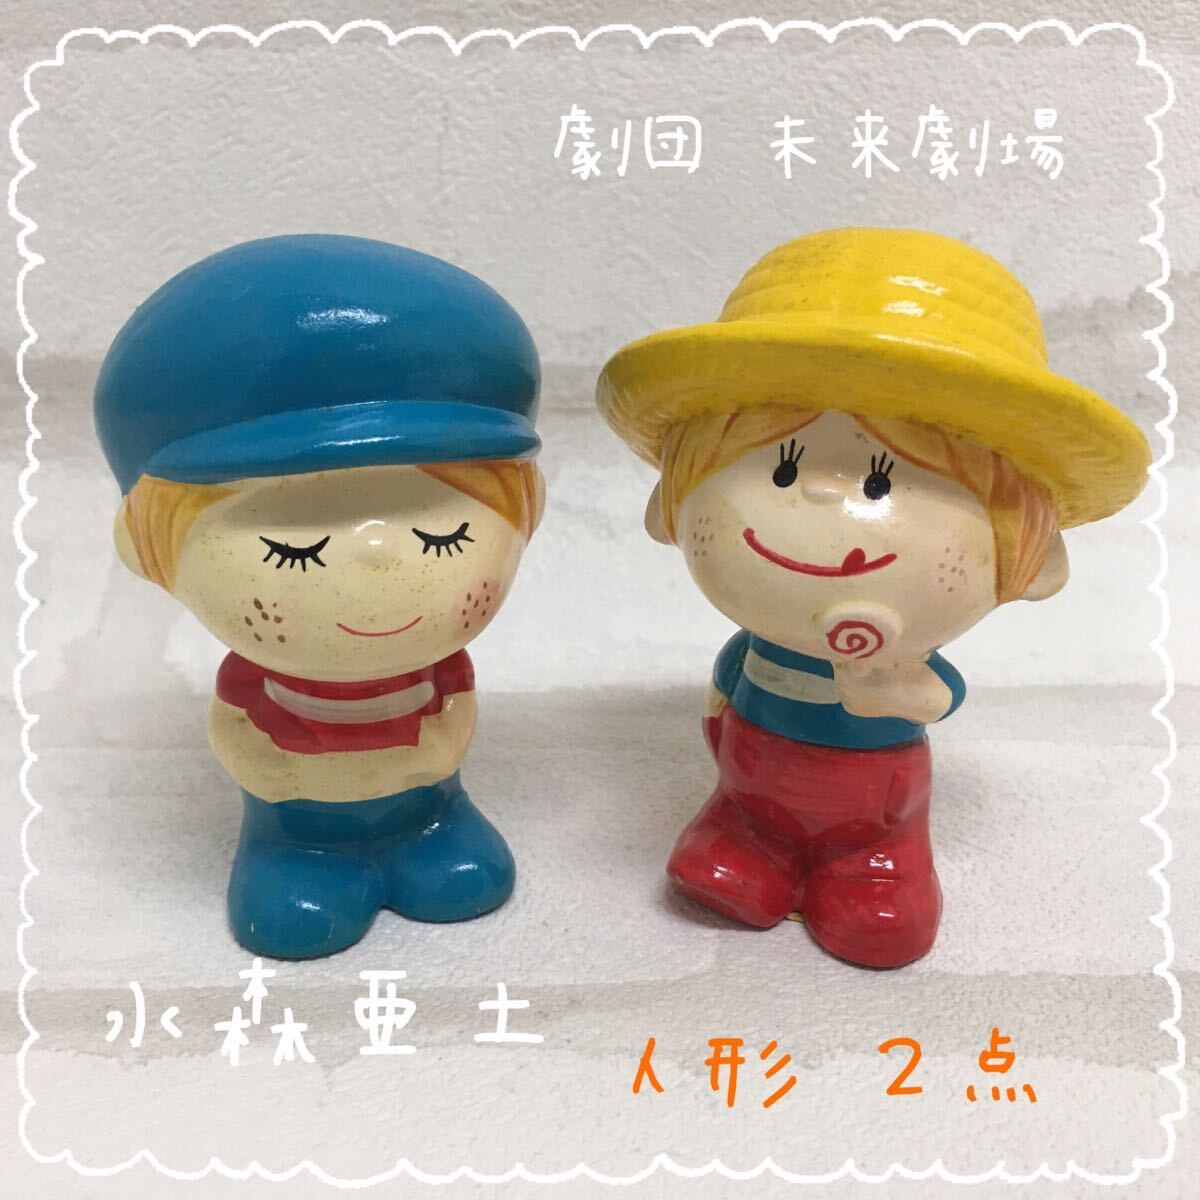 SU# Showa Retro #.. future theater water forest . earth doll together 2 point set ceramics made height approximately 7cm figure collection Vintage that time thing 